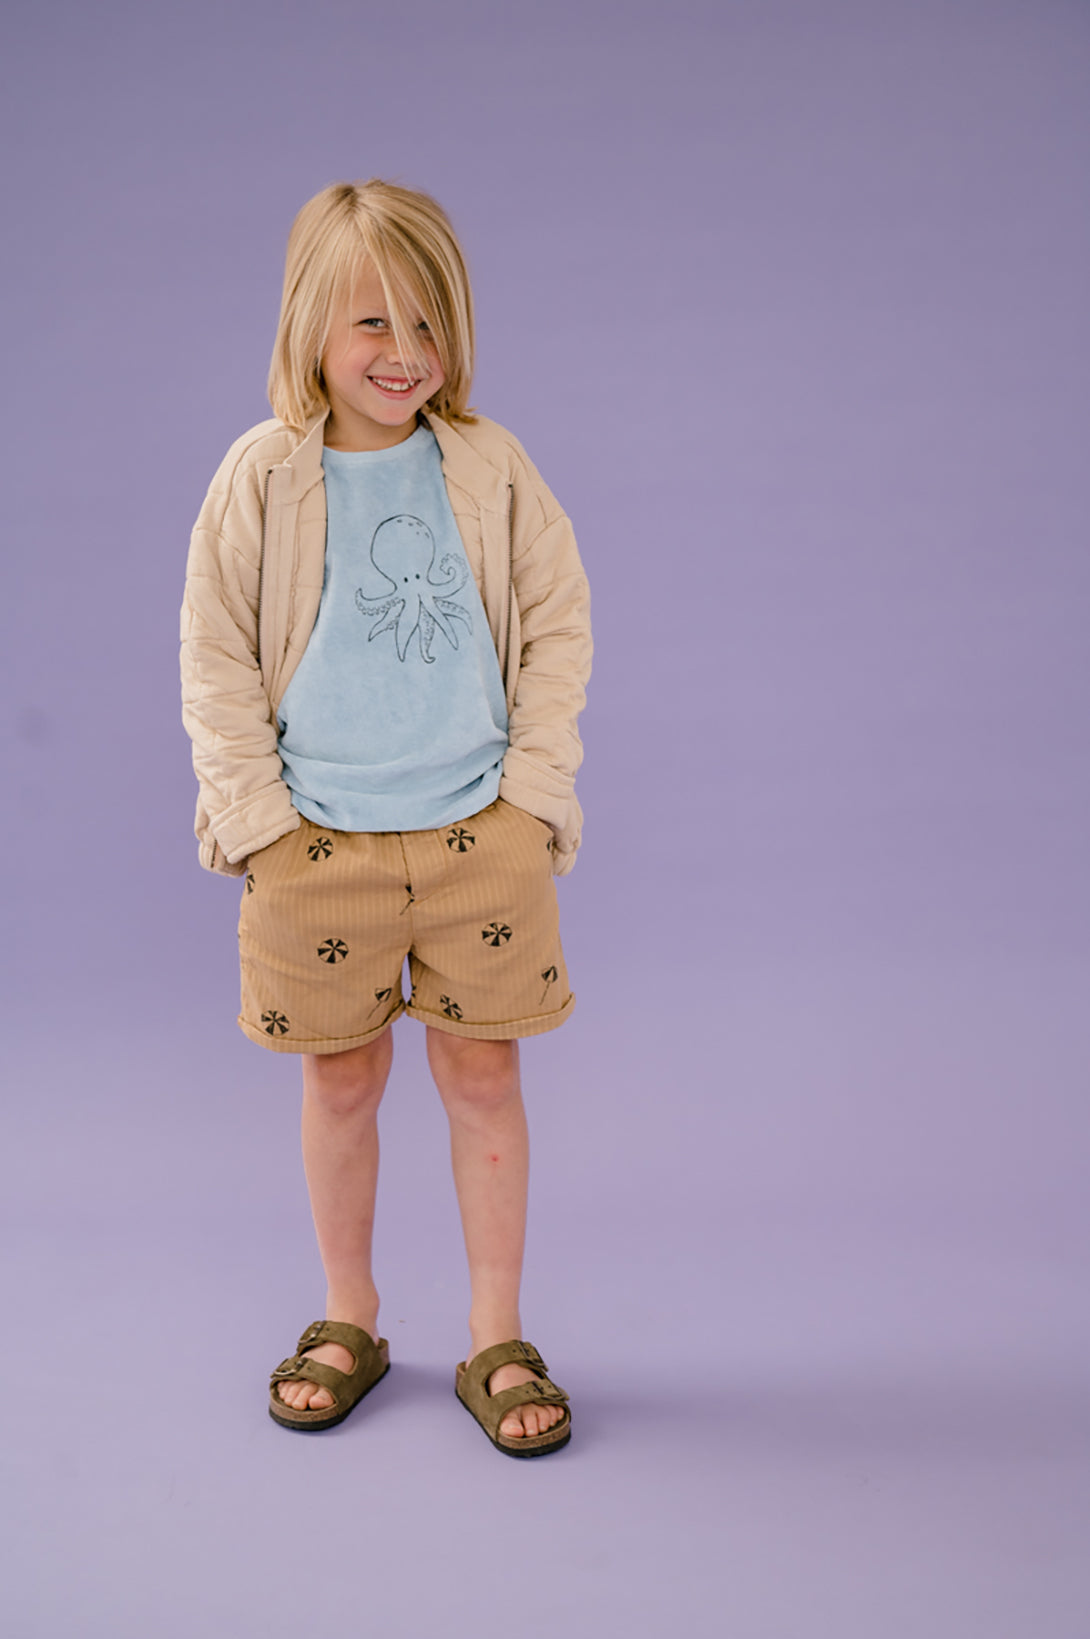 【SPROET&SPROUT】【40％off】Paperbag shorts umbrella print 4Y,12Y  | Coucoubebe/ククベベ